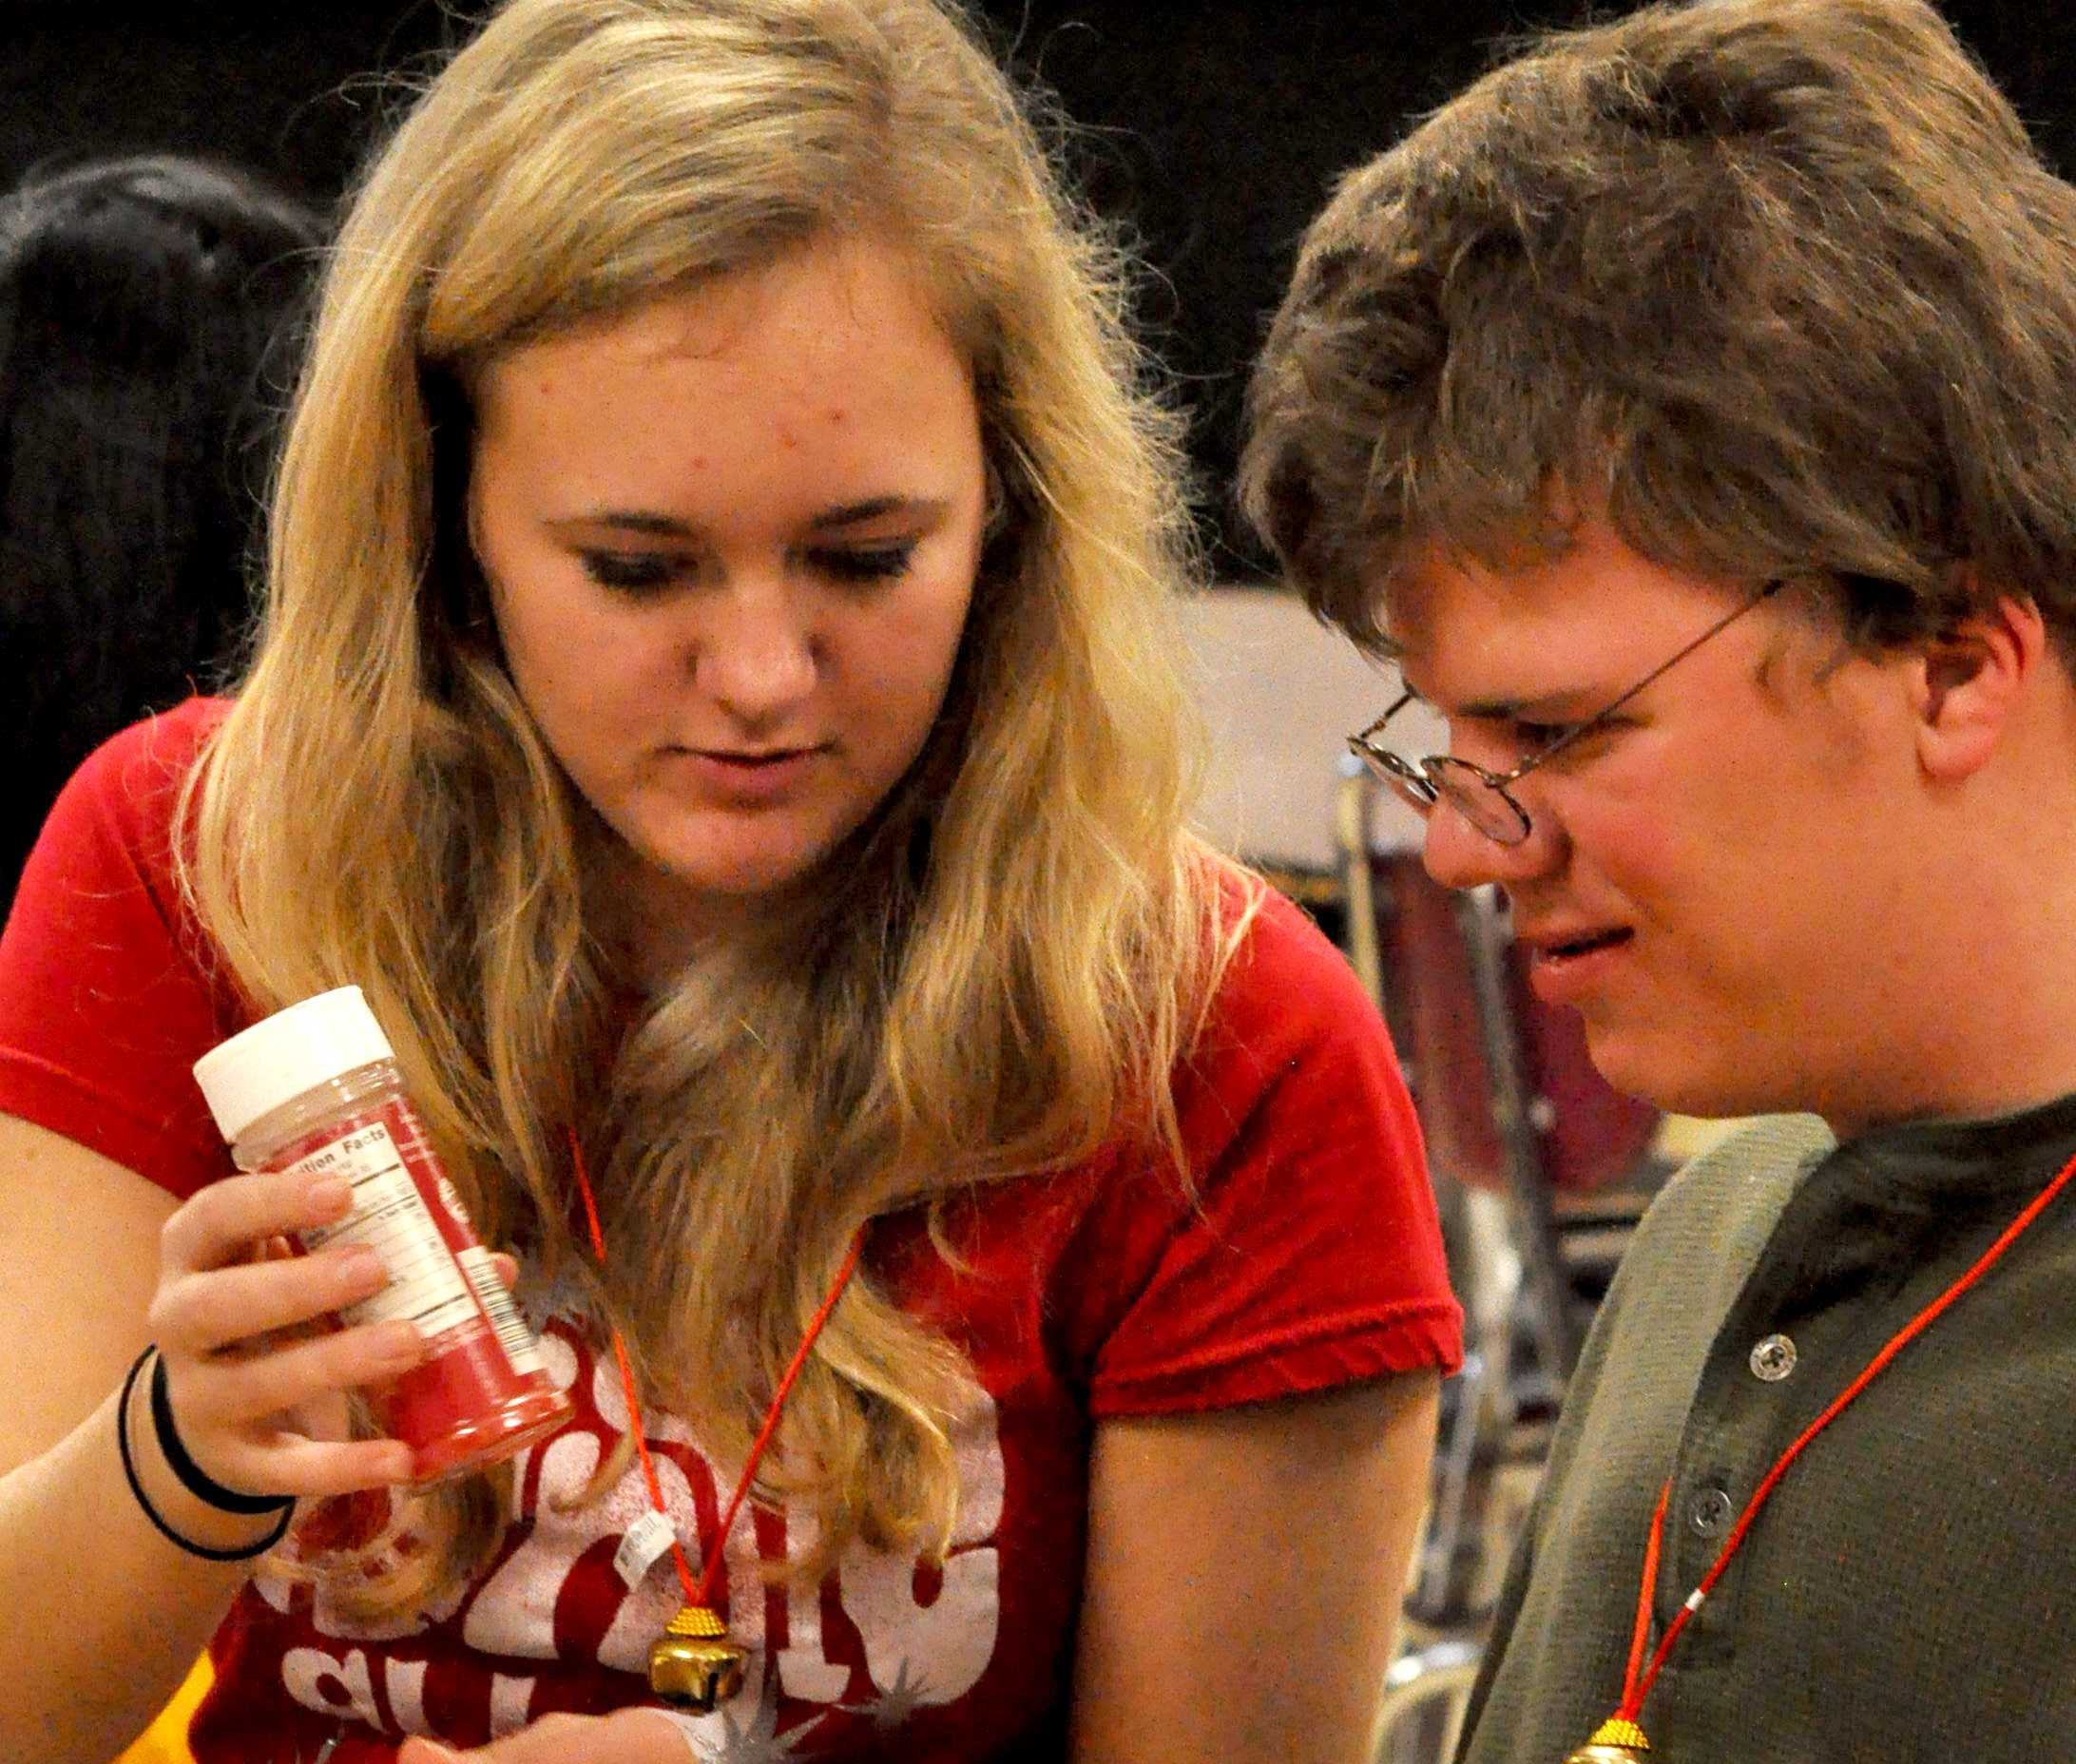 Kimberly Voss, jr., helps her buddy Zach Zenk, jr., put sprinkles on top of his coookie.